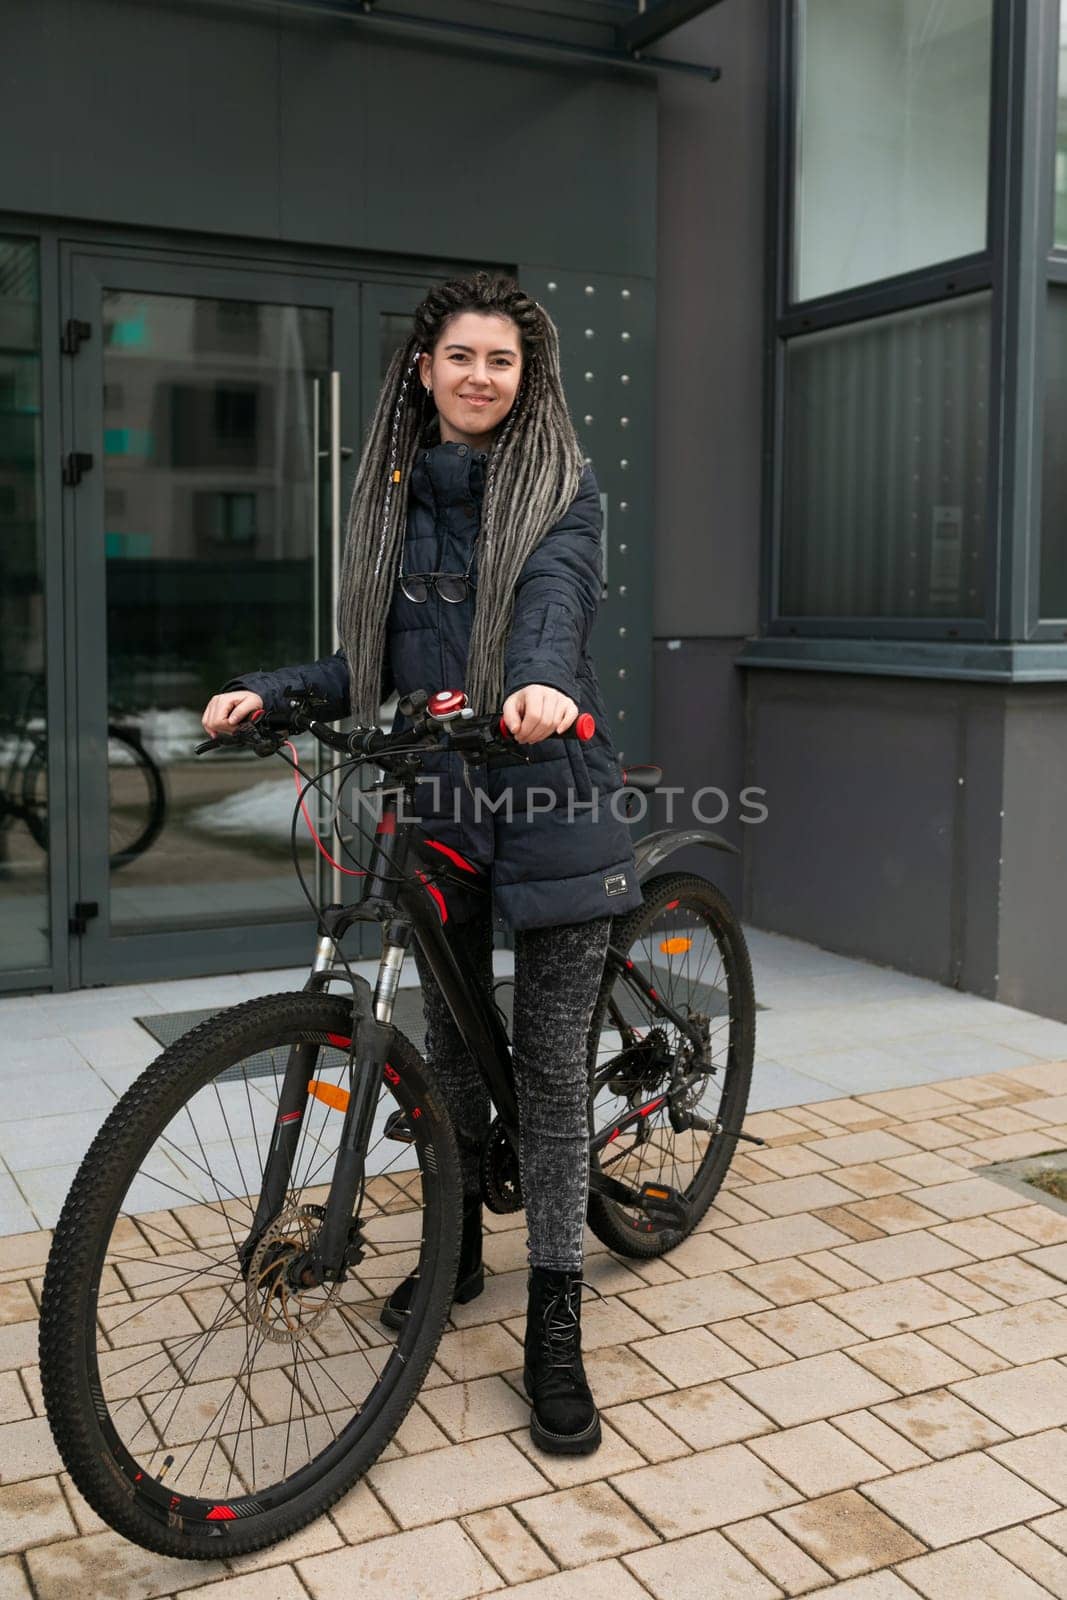 Bike rental concept, young caucasian woman riding a bike on the street.